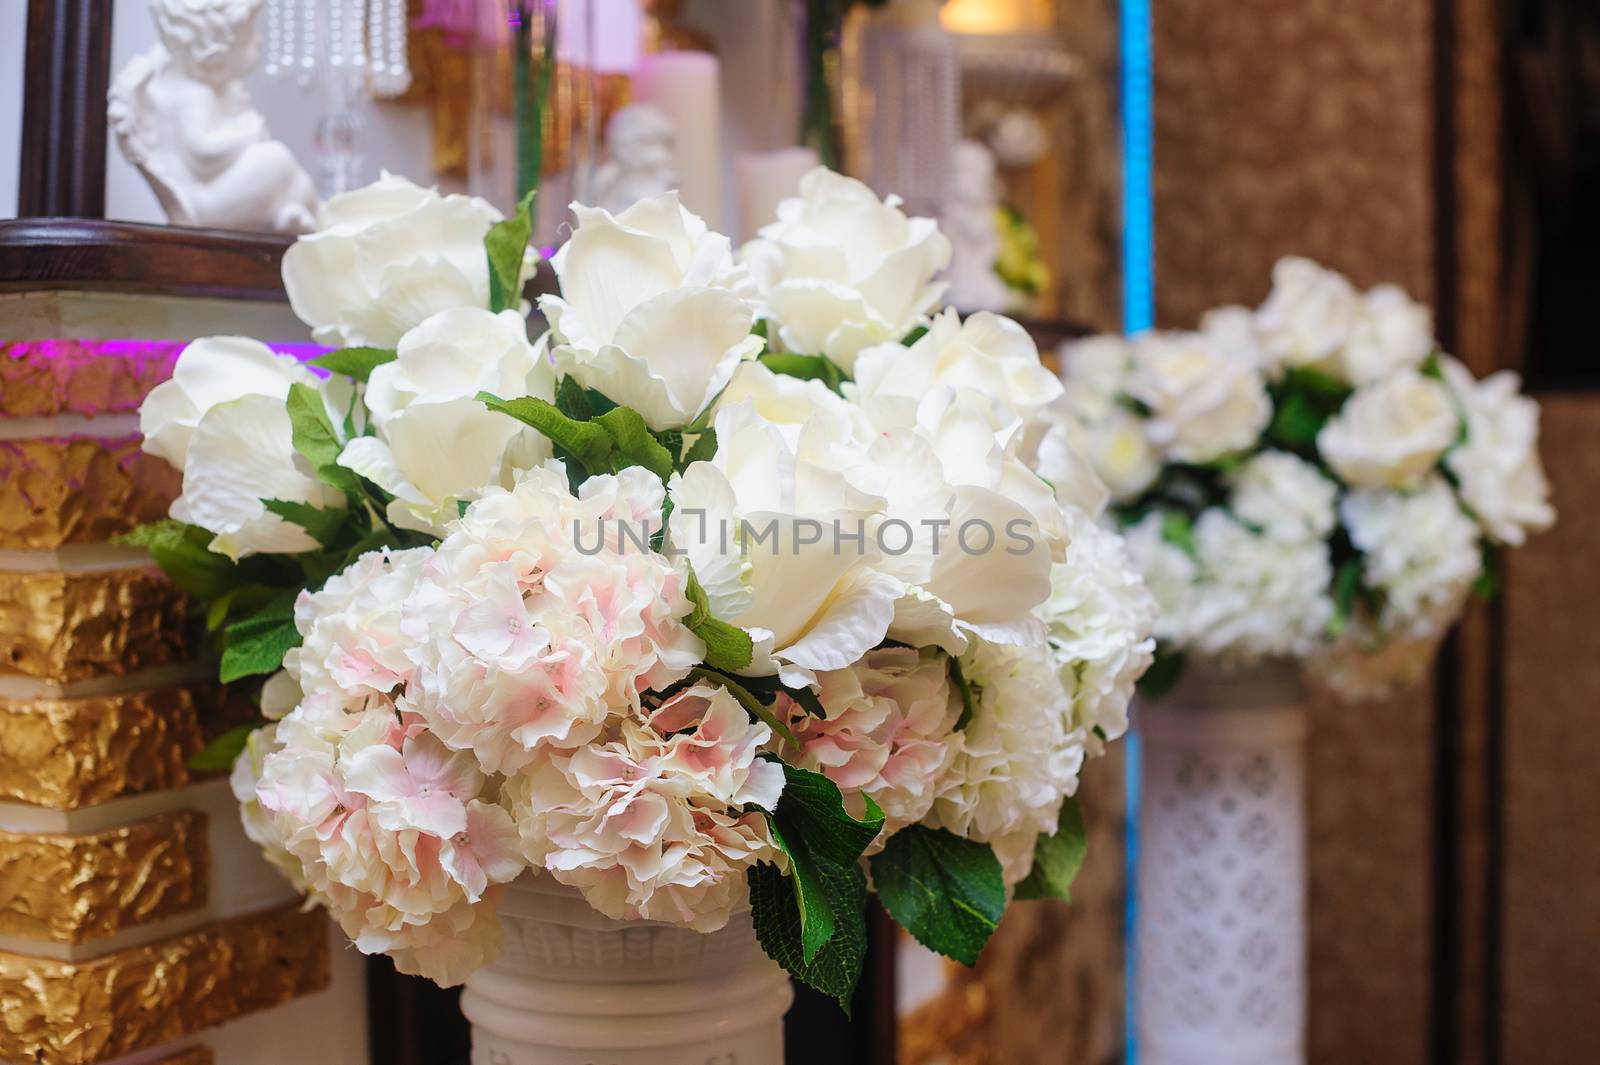 wedding bouquet of white roses. Decor in the restaurant.